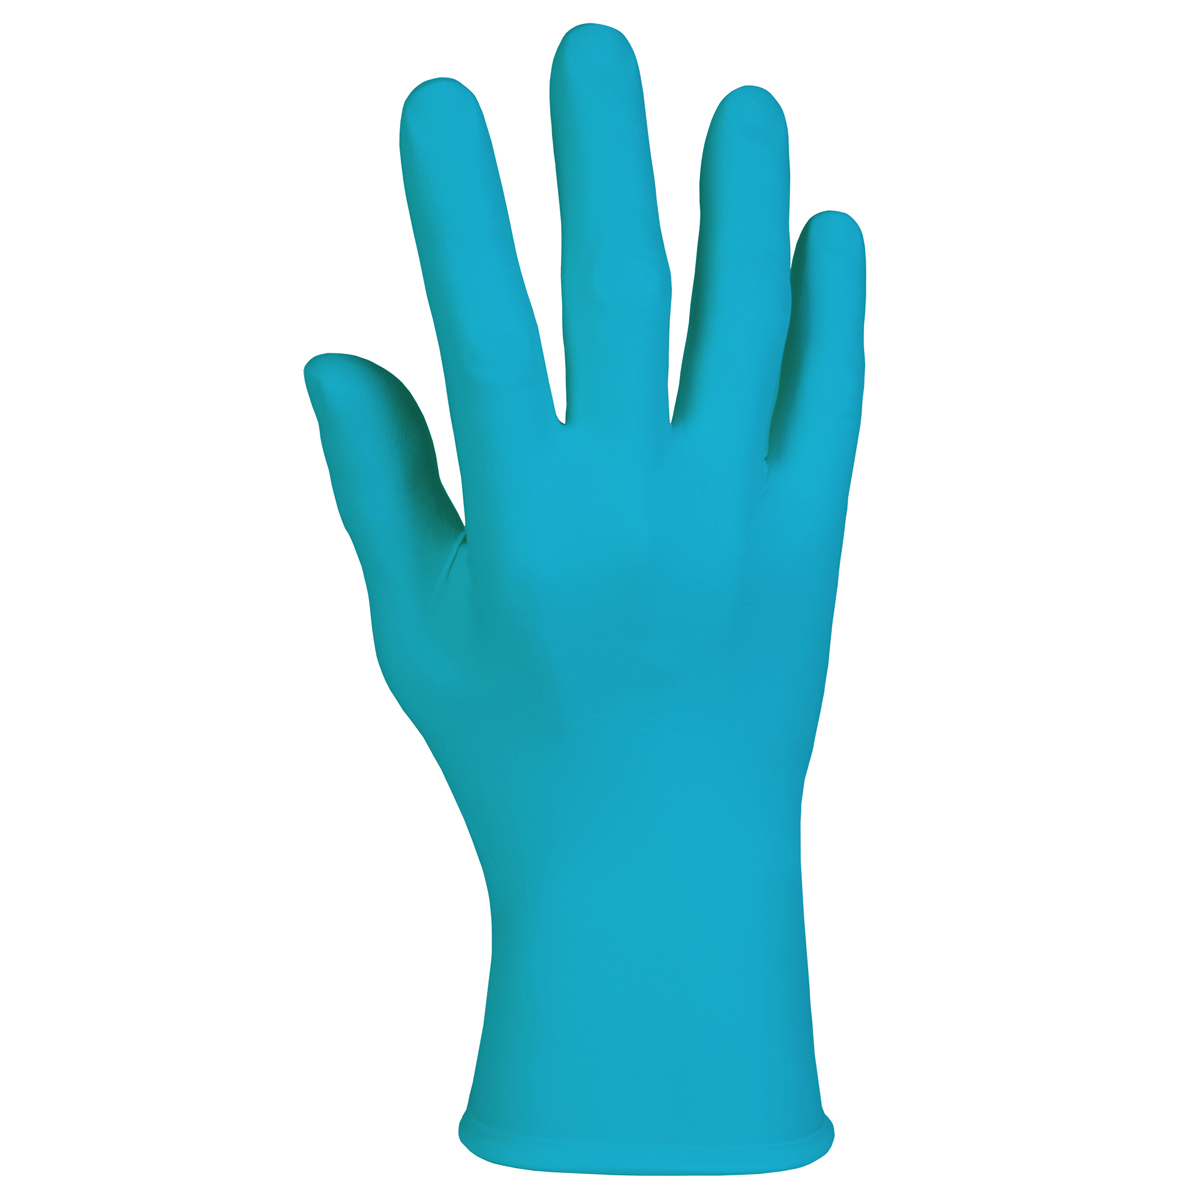 Kimberly-Clark Professional* X-Small Blue Kimtech Pure* G5 5.1 mil Nitrile Powder-Free Disposable Gloves (100 Gloves Per Box) (A